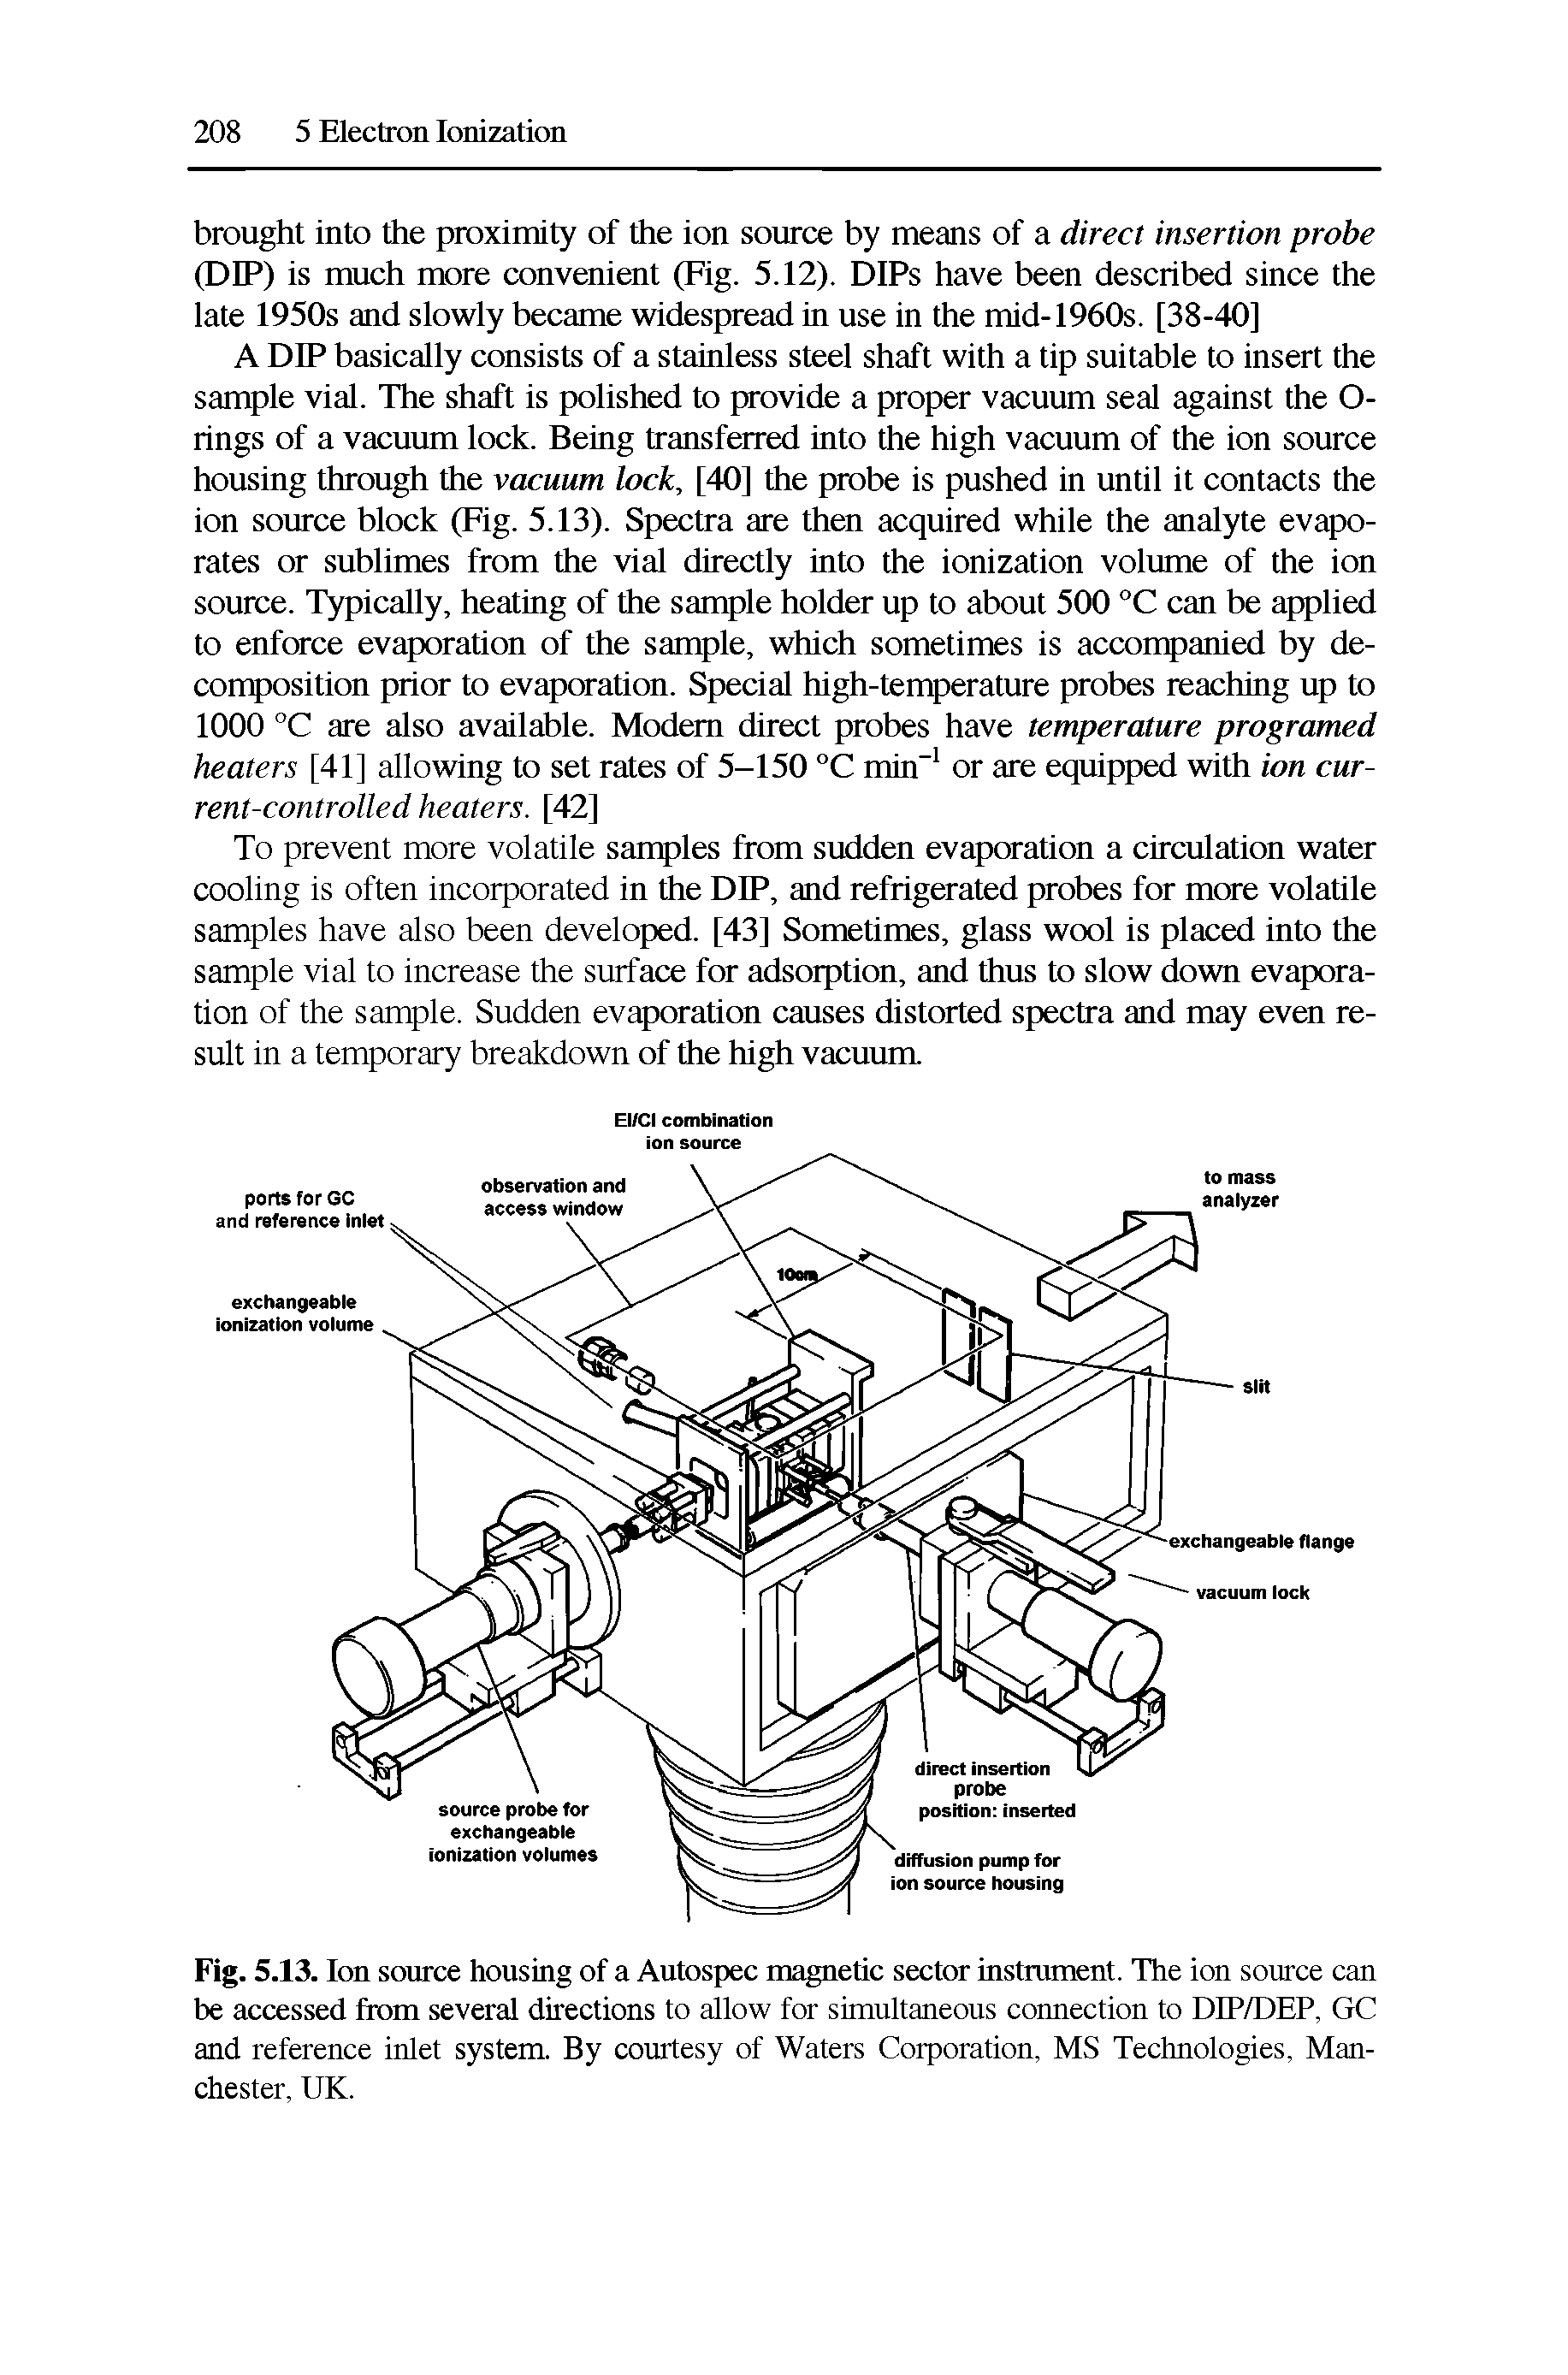 Fig. 5.13. Ion source housing of a Autospec magnetic sector instrament. The ion source can be accessed from several directions to allow for simultaneous connection to DIP/DEP, GC and reference inlet system. By courtesy of Waters Corporation, MS Technologies, Manchester, UK.